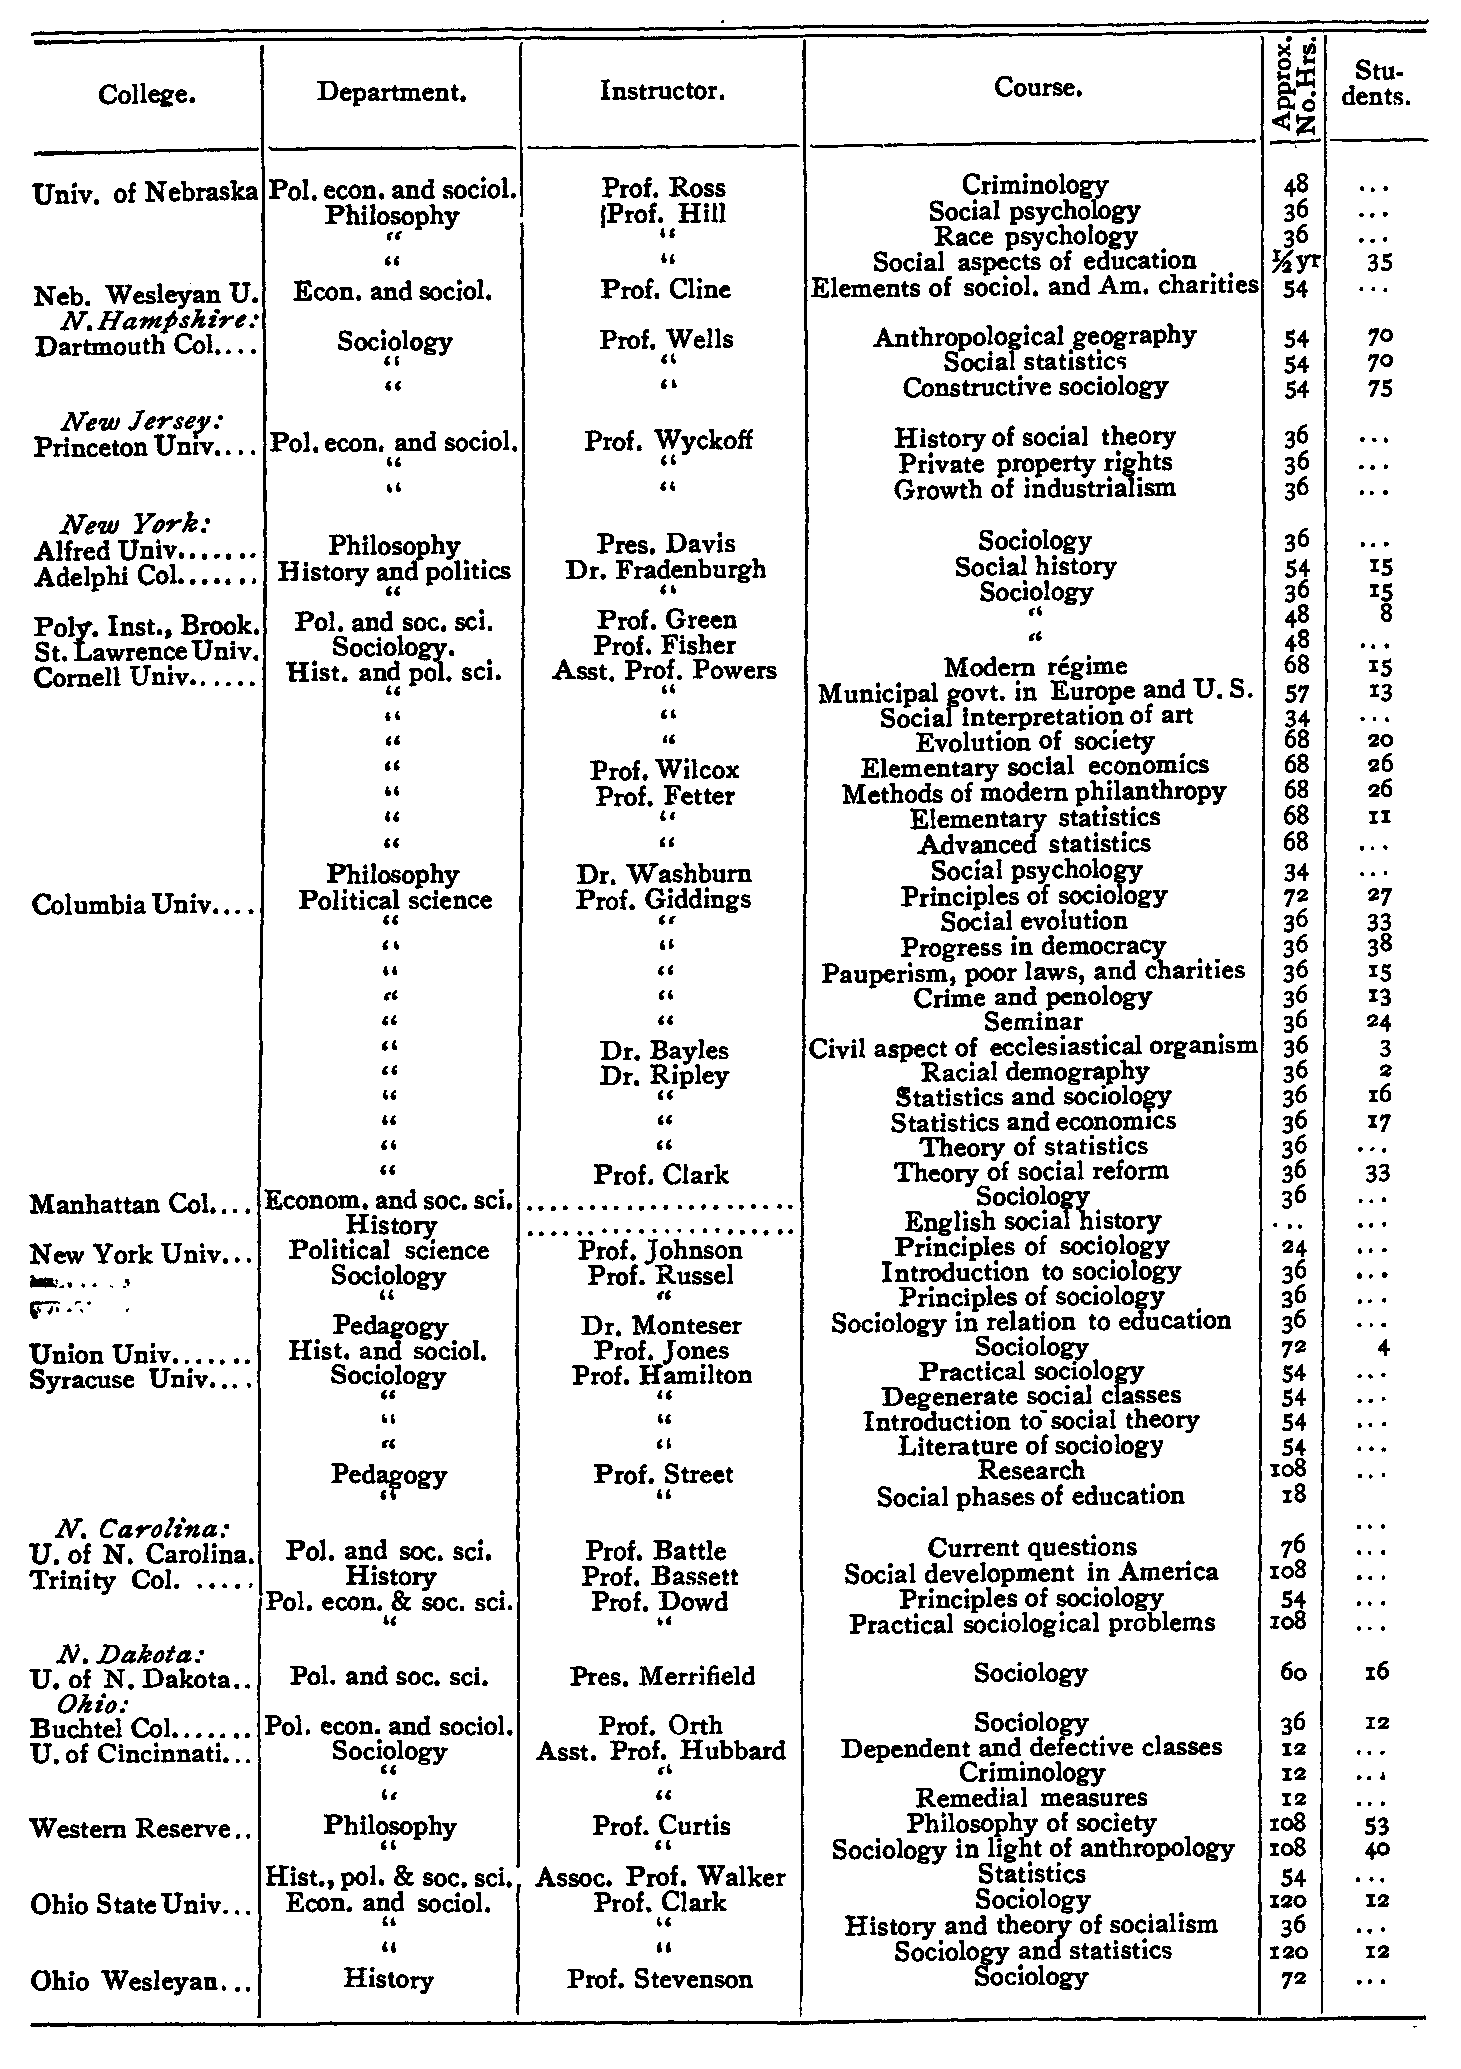 Schedule of Courses in Sociology in 1907, part 5